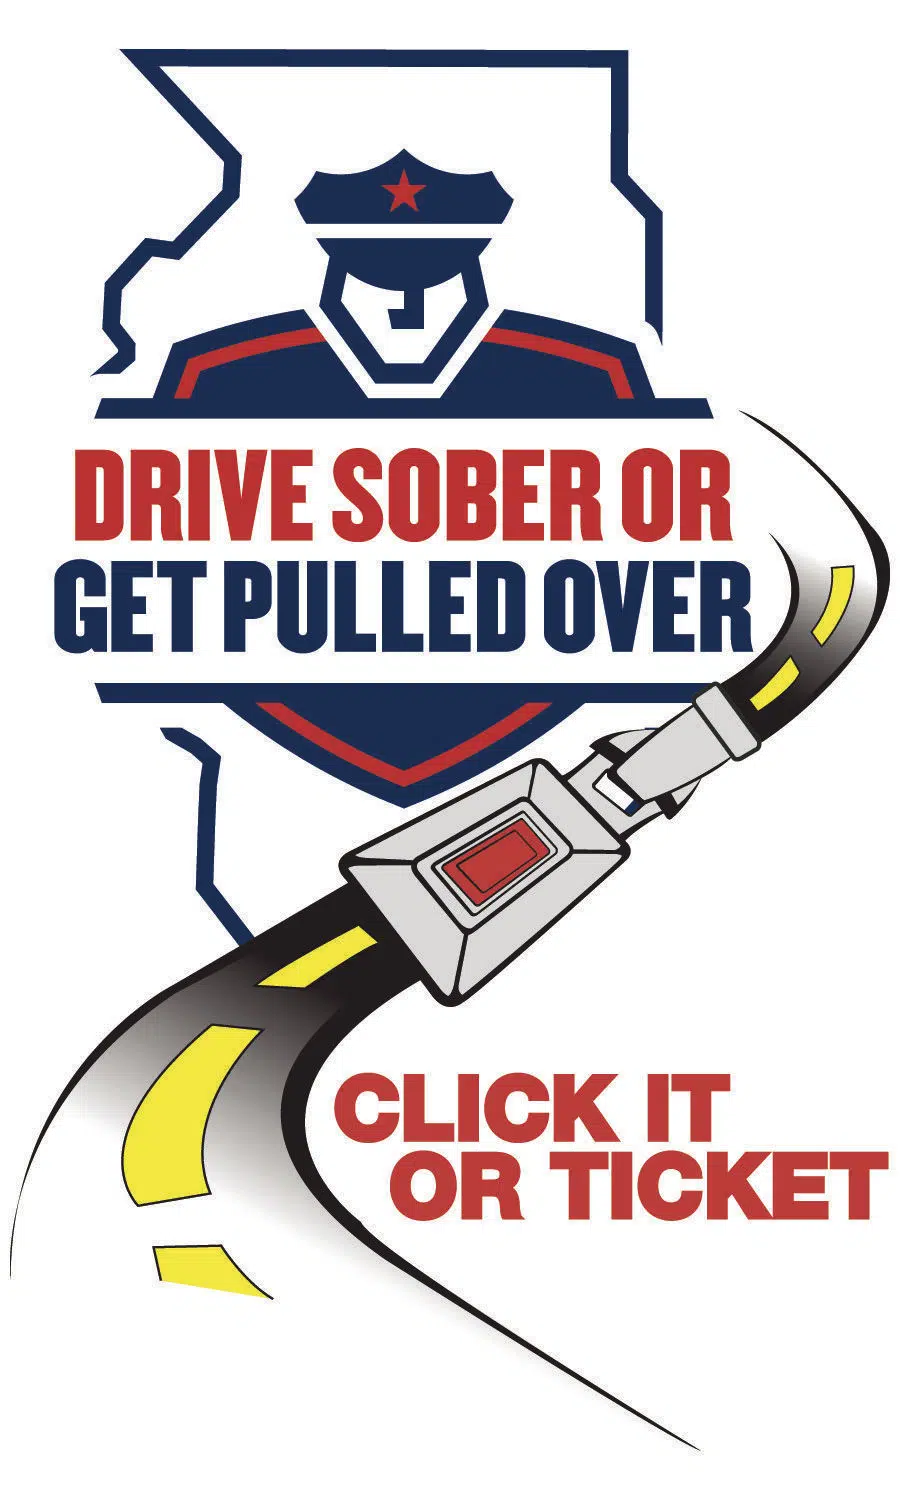 The Decatur Police Department Announces St. Patrick’s Day ‘Drive Sober or Get Pulled Over’ Enforcement Results